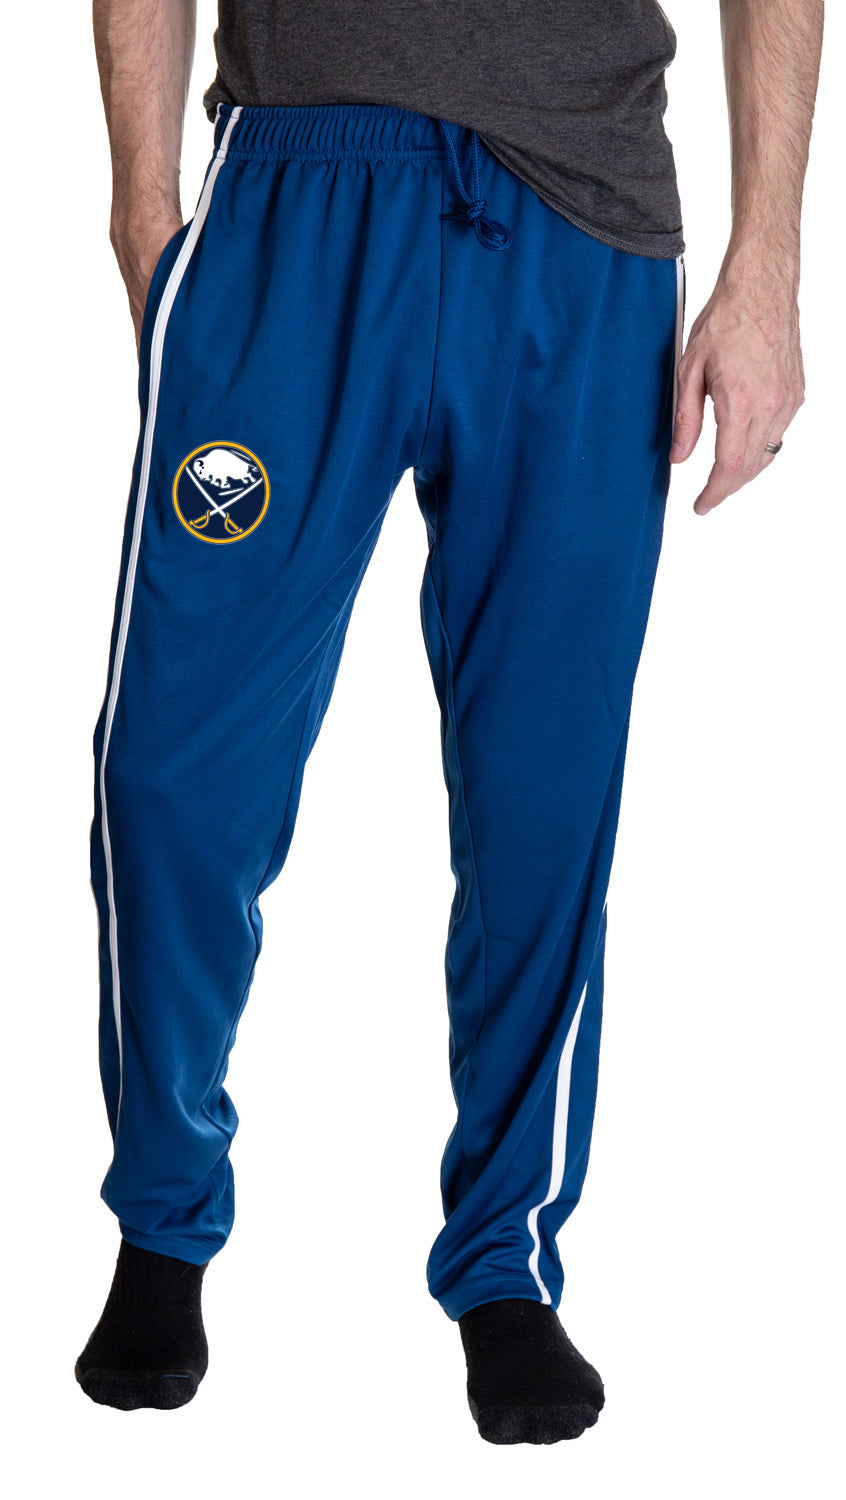 Buffalo Sabres Striped Training Pants for Men